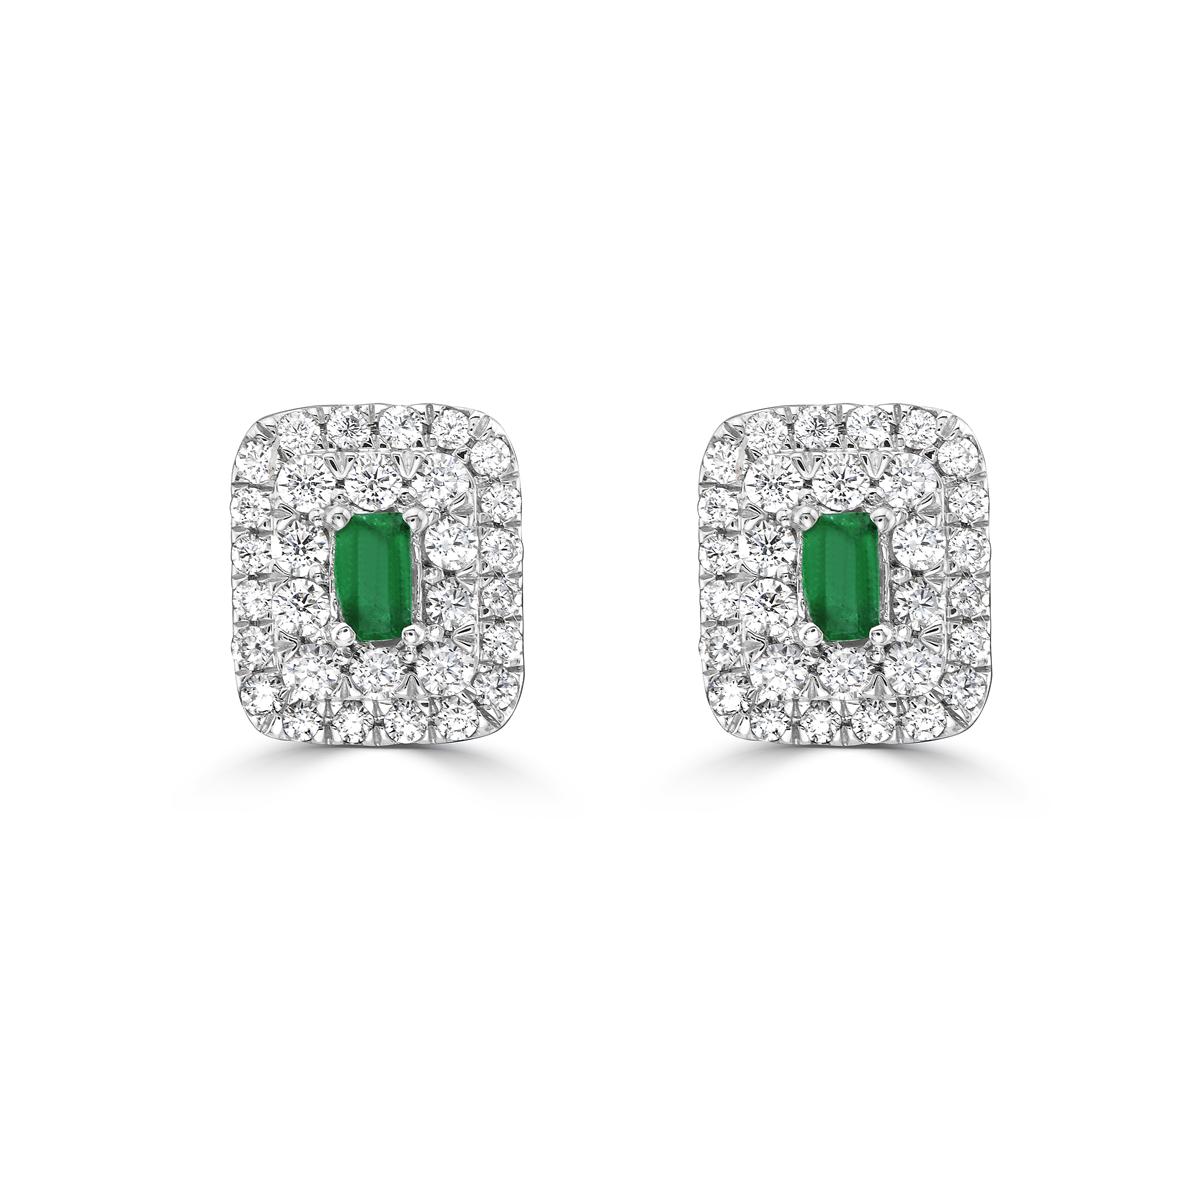 Indulge in luxury with our Emerald Baguette and Diamond Double Halo Stud Earrings. Featuring stunning baguette-cut emeralds, these emerald stud earrings exude sophistication and exclusivity. The dazzling double halo design with accompanying diamonds